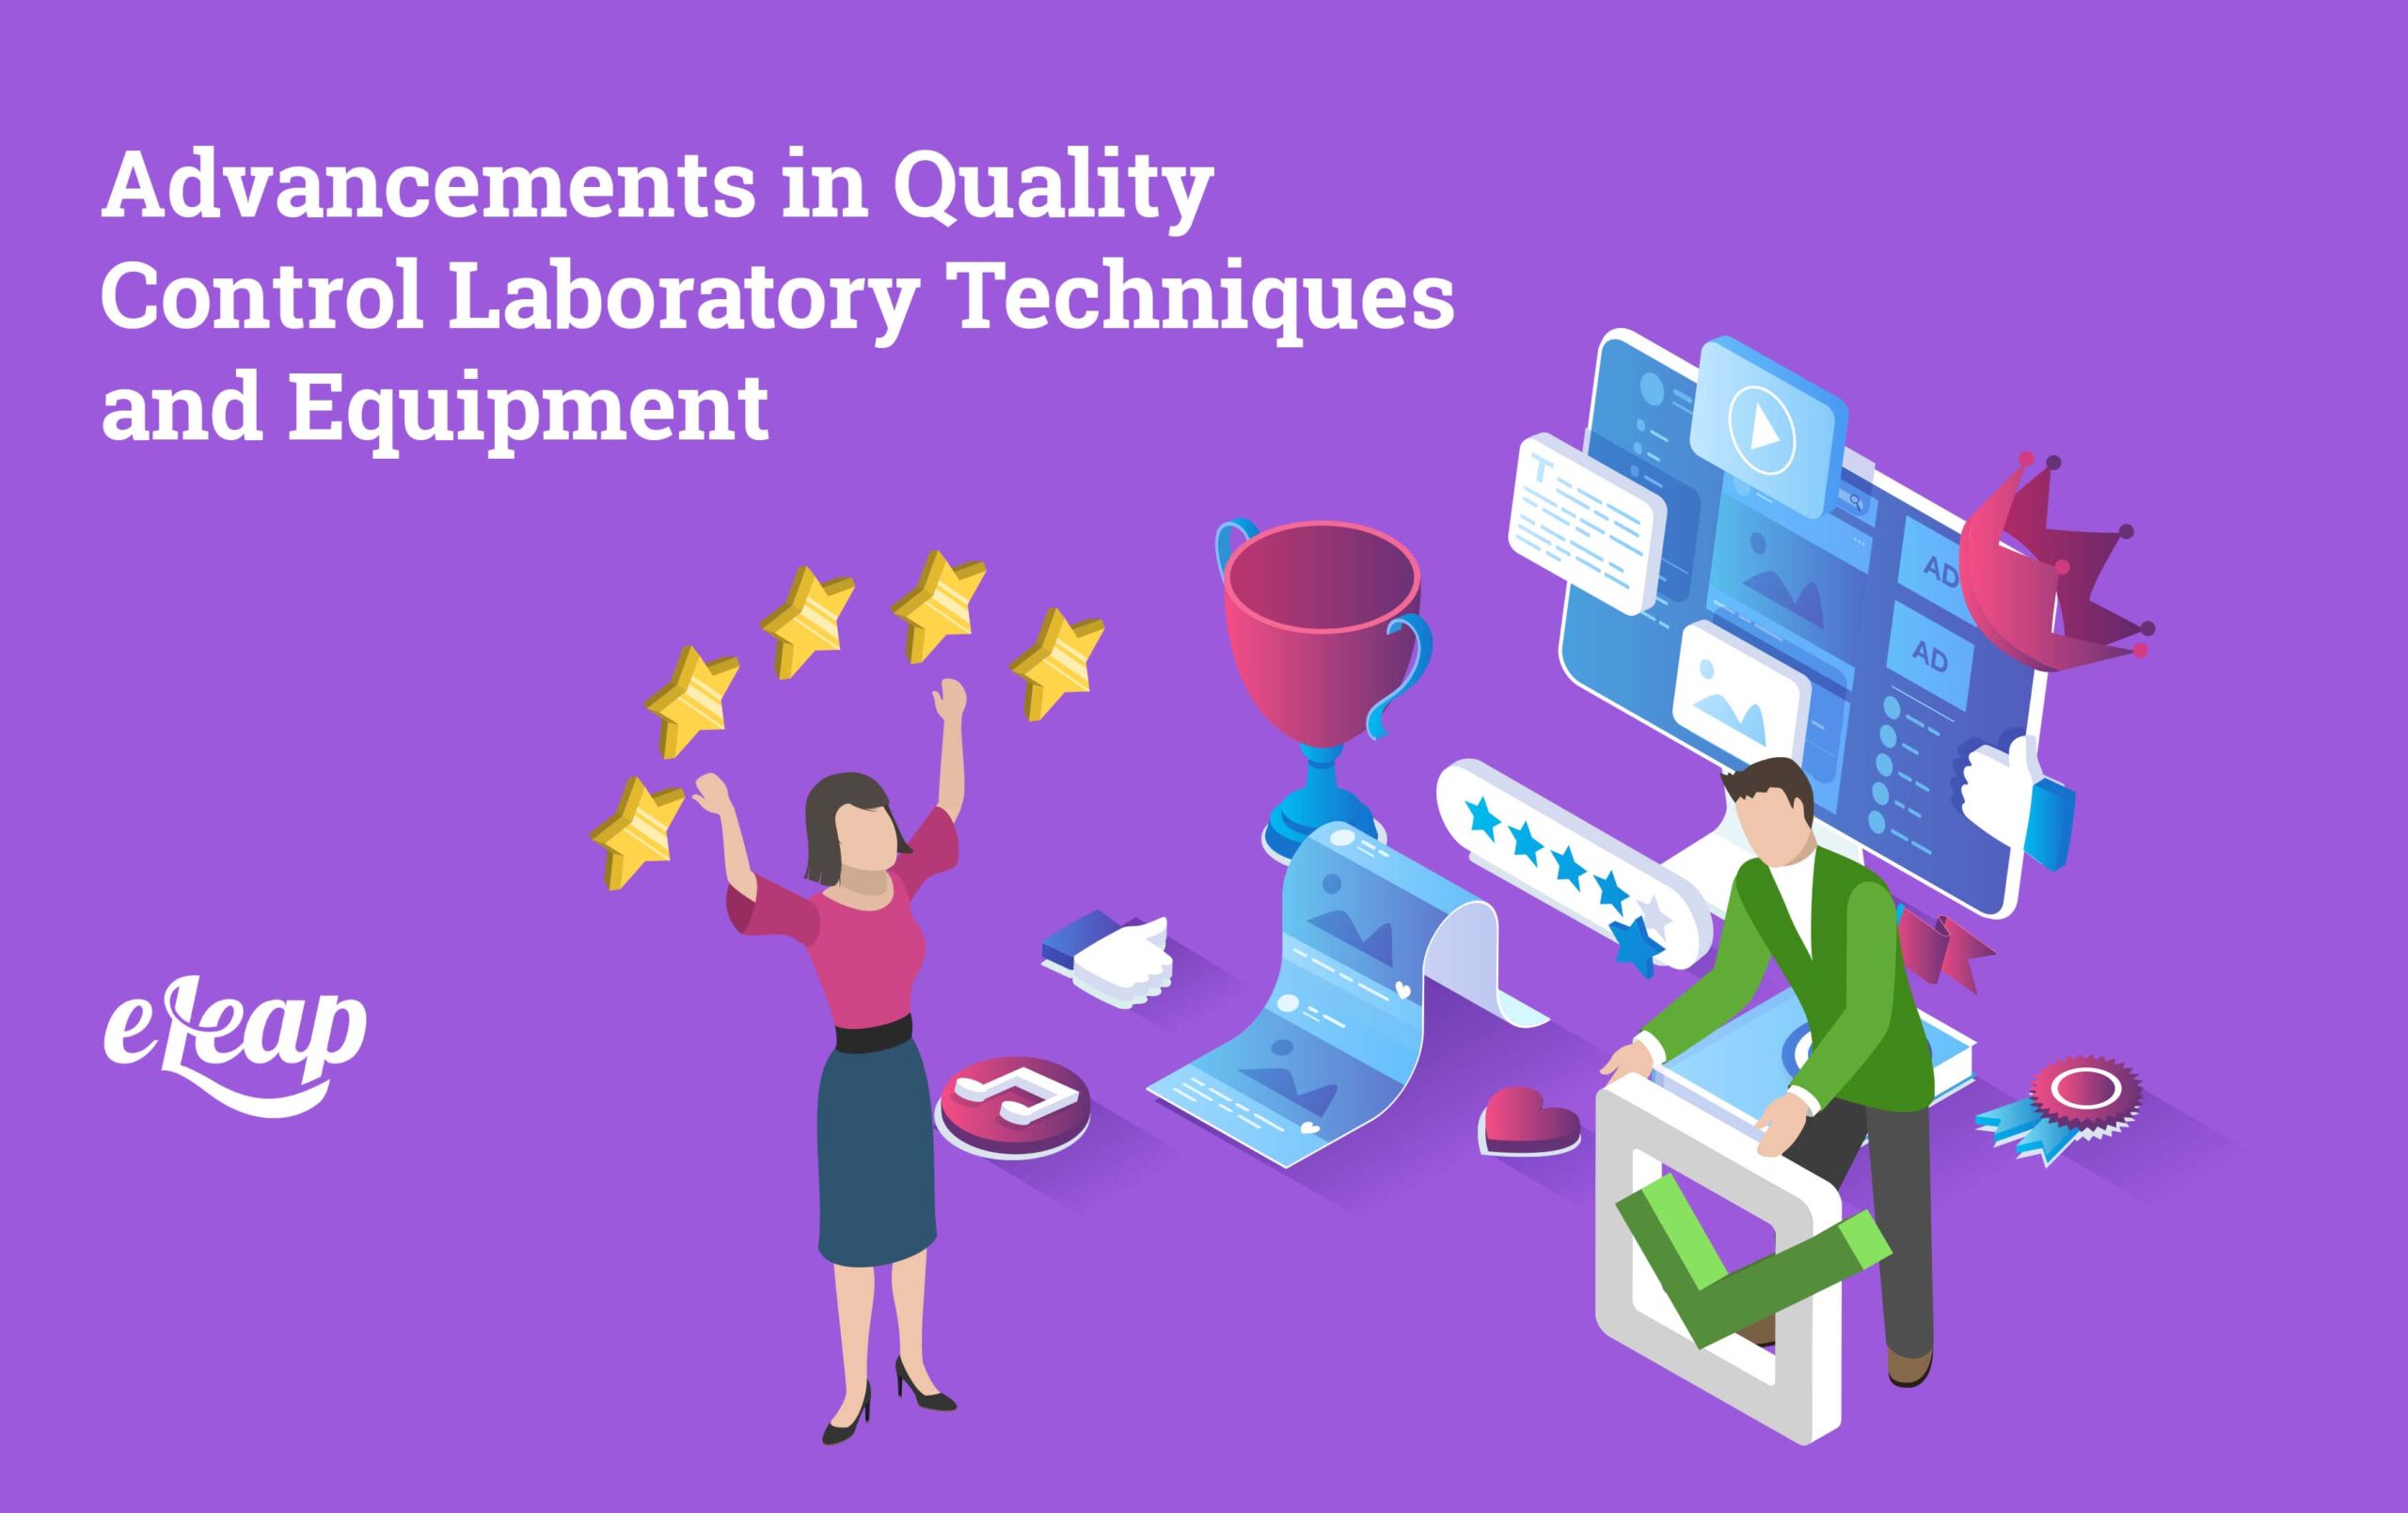 Advancements in Quality Control Laboratory Techniques and Equipment